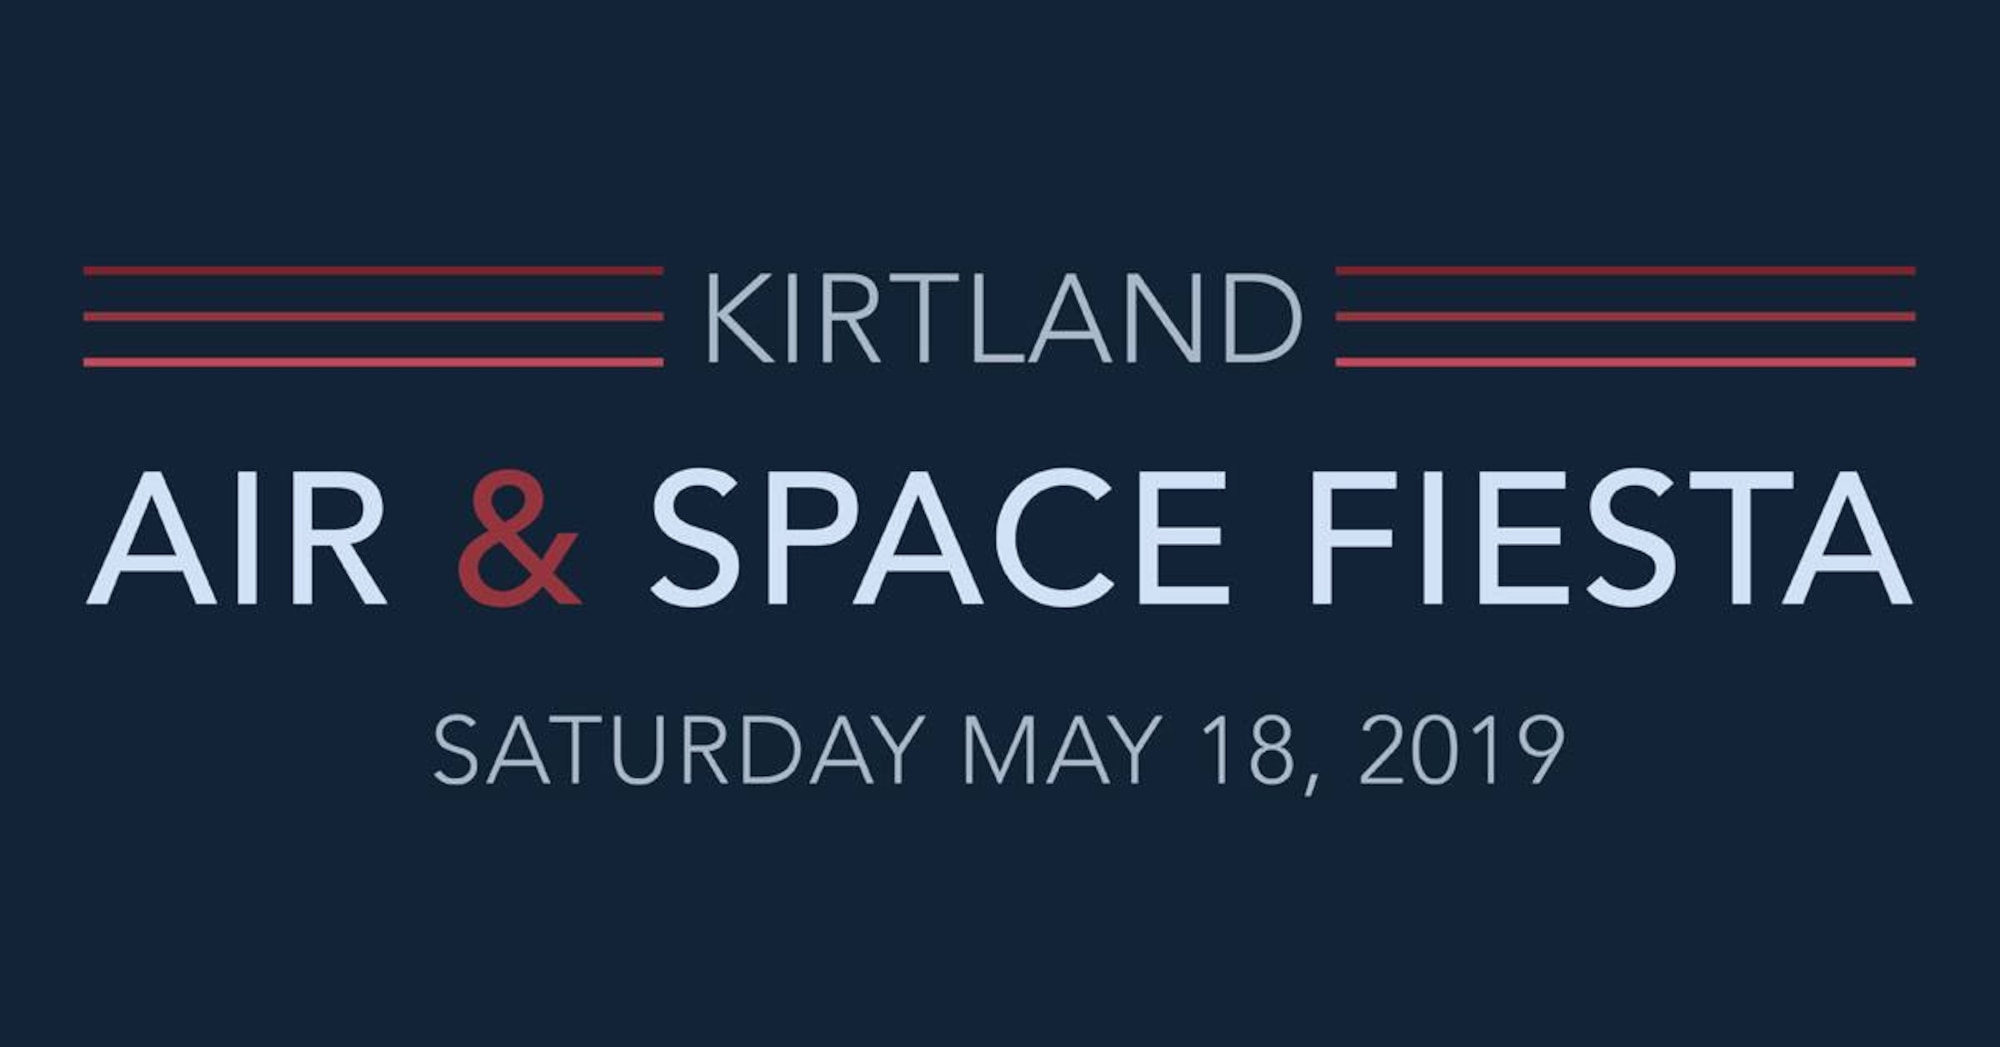 Our 2019 Kirtland Air and Space Fiesta takes place May 18, 2019. It is free and open to the public!